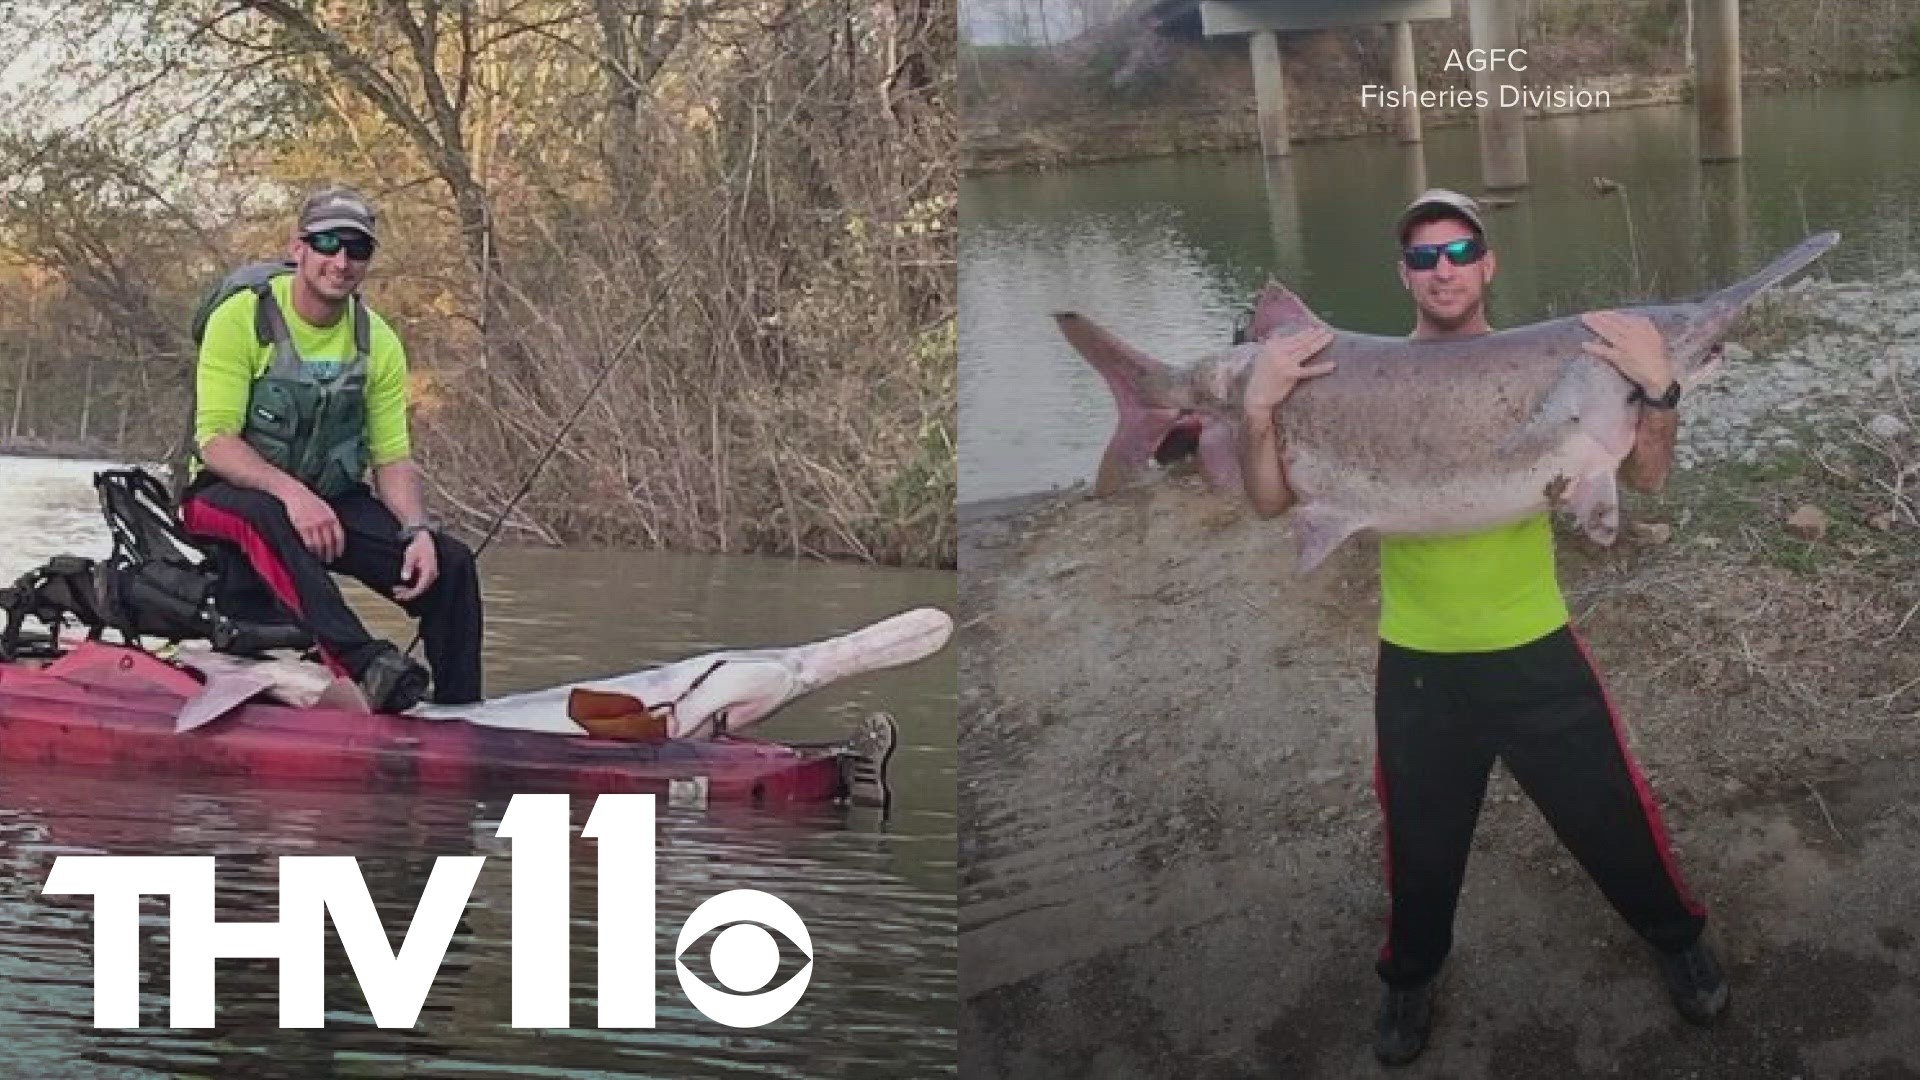 Robert Murphy of Fayetteville recently caught a massive 102-lb paddlefish while fishing on the Upper White River near Goshen.